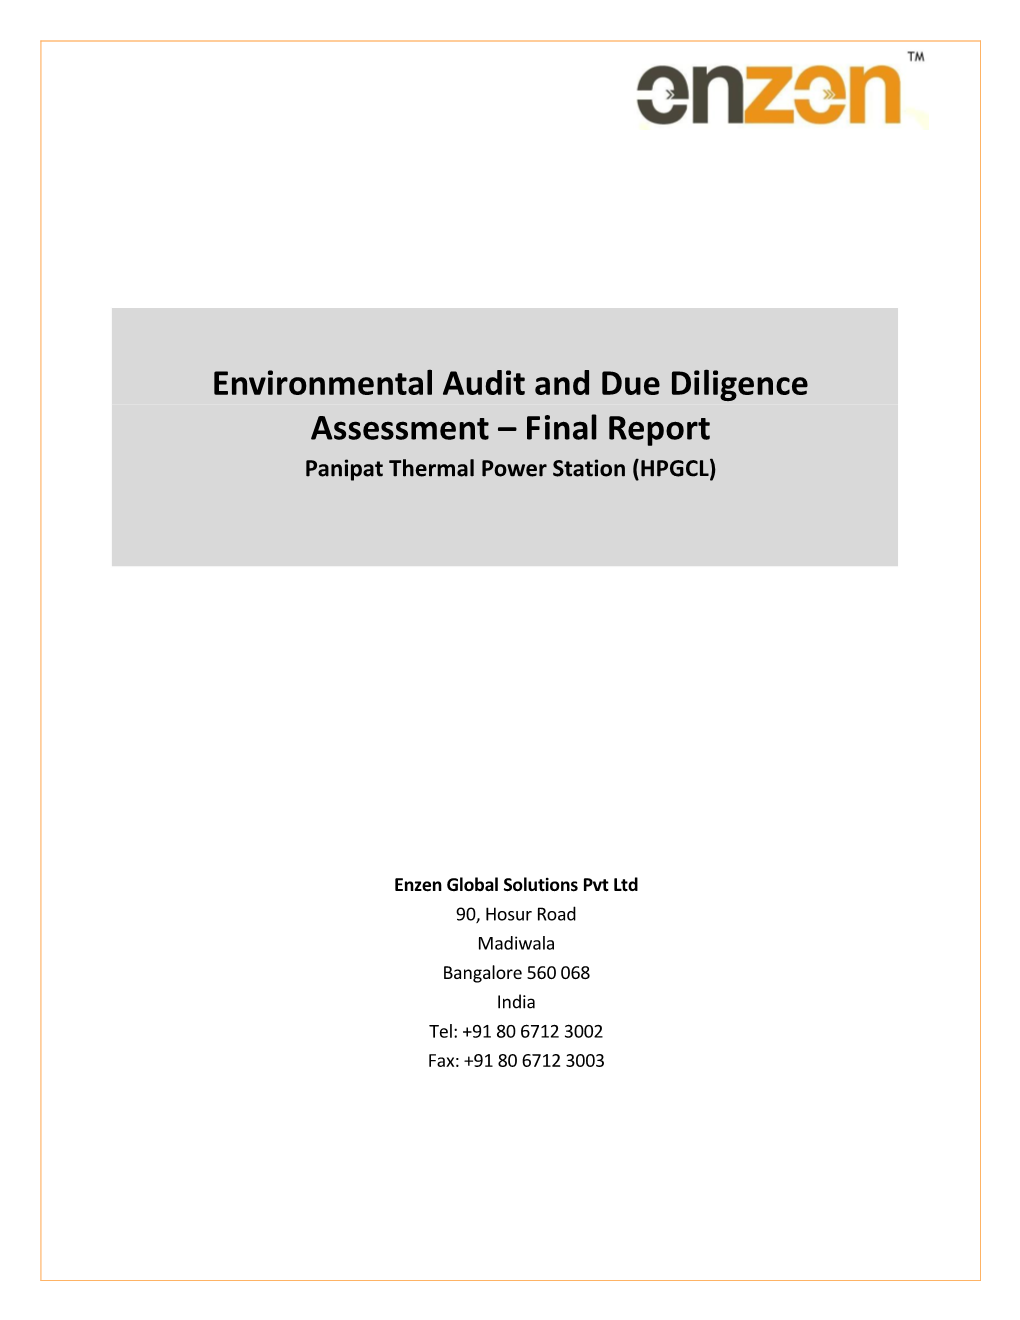 Environmental Audit and Due Diligence Assessment – Final Report Panipat Thermal Power Station (HPGCL)